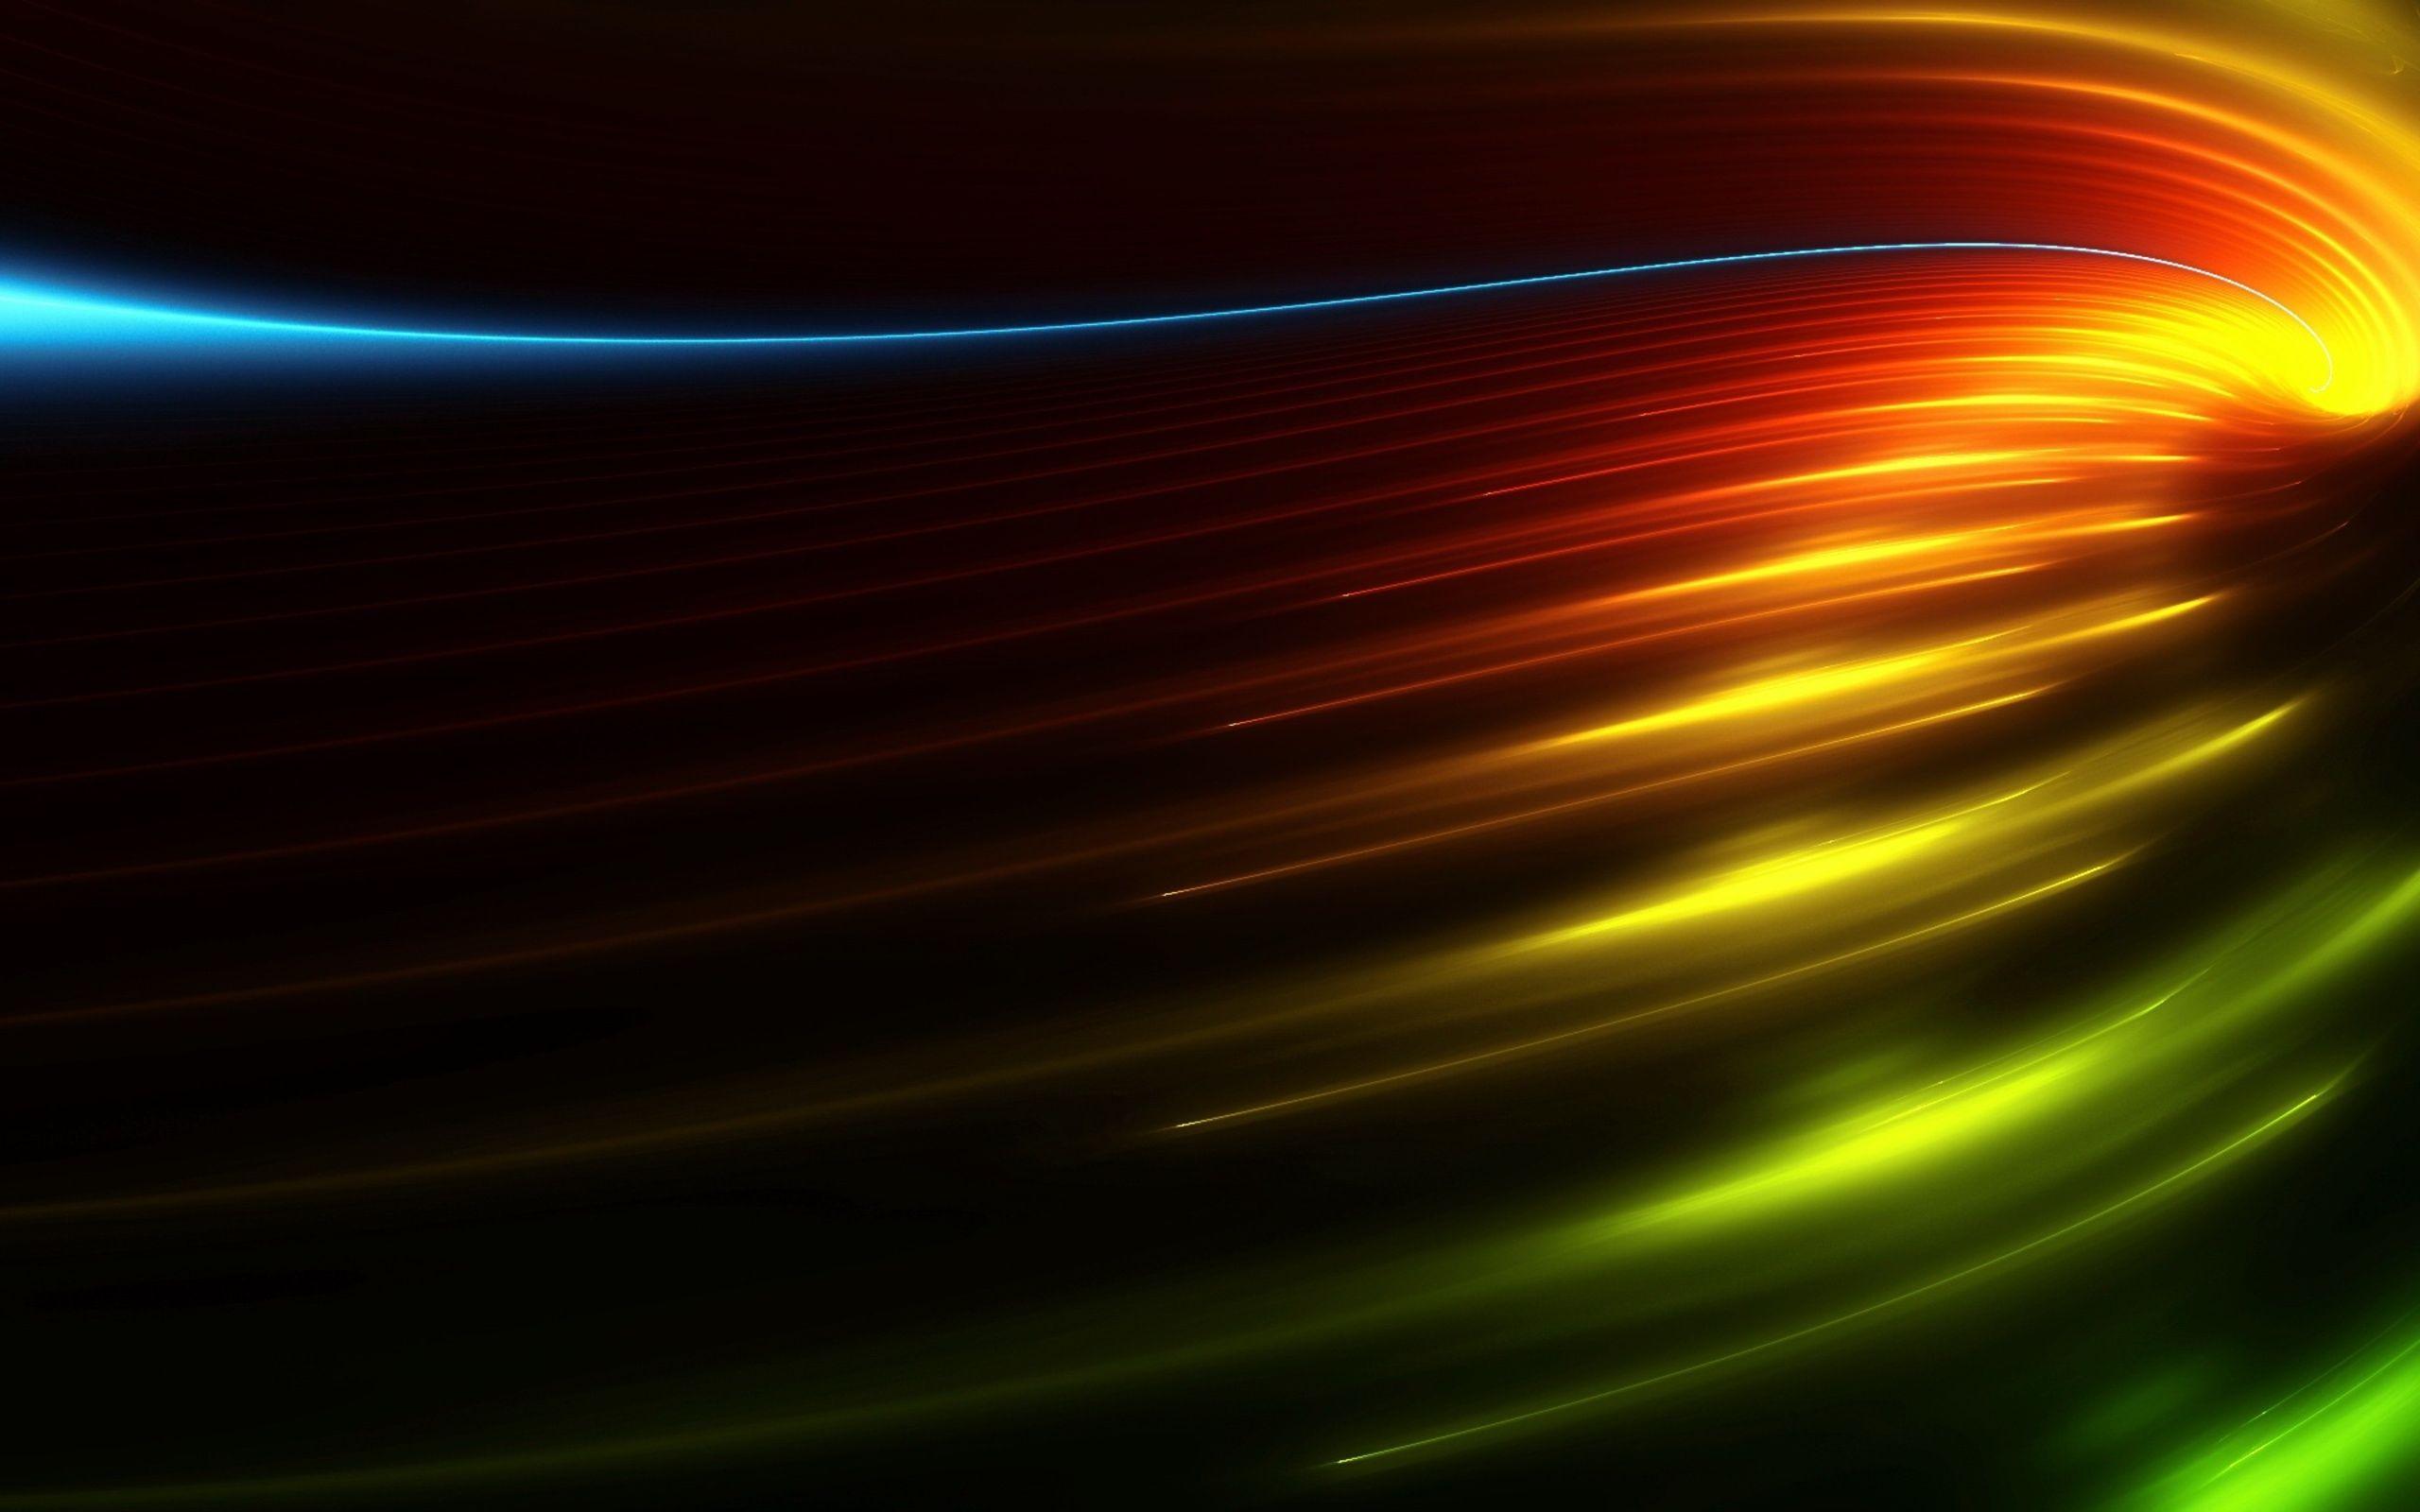 Abstract Windows Wallpapers - Top Free Abstract Windows Backgrounds ...